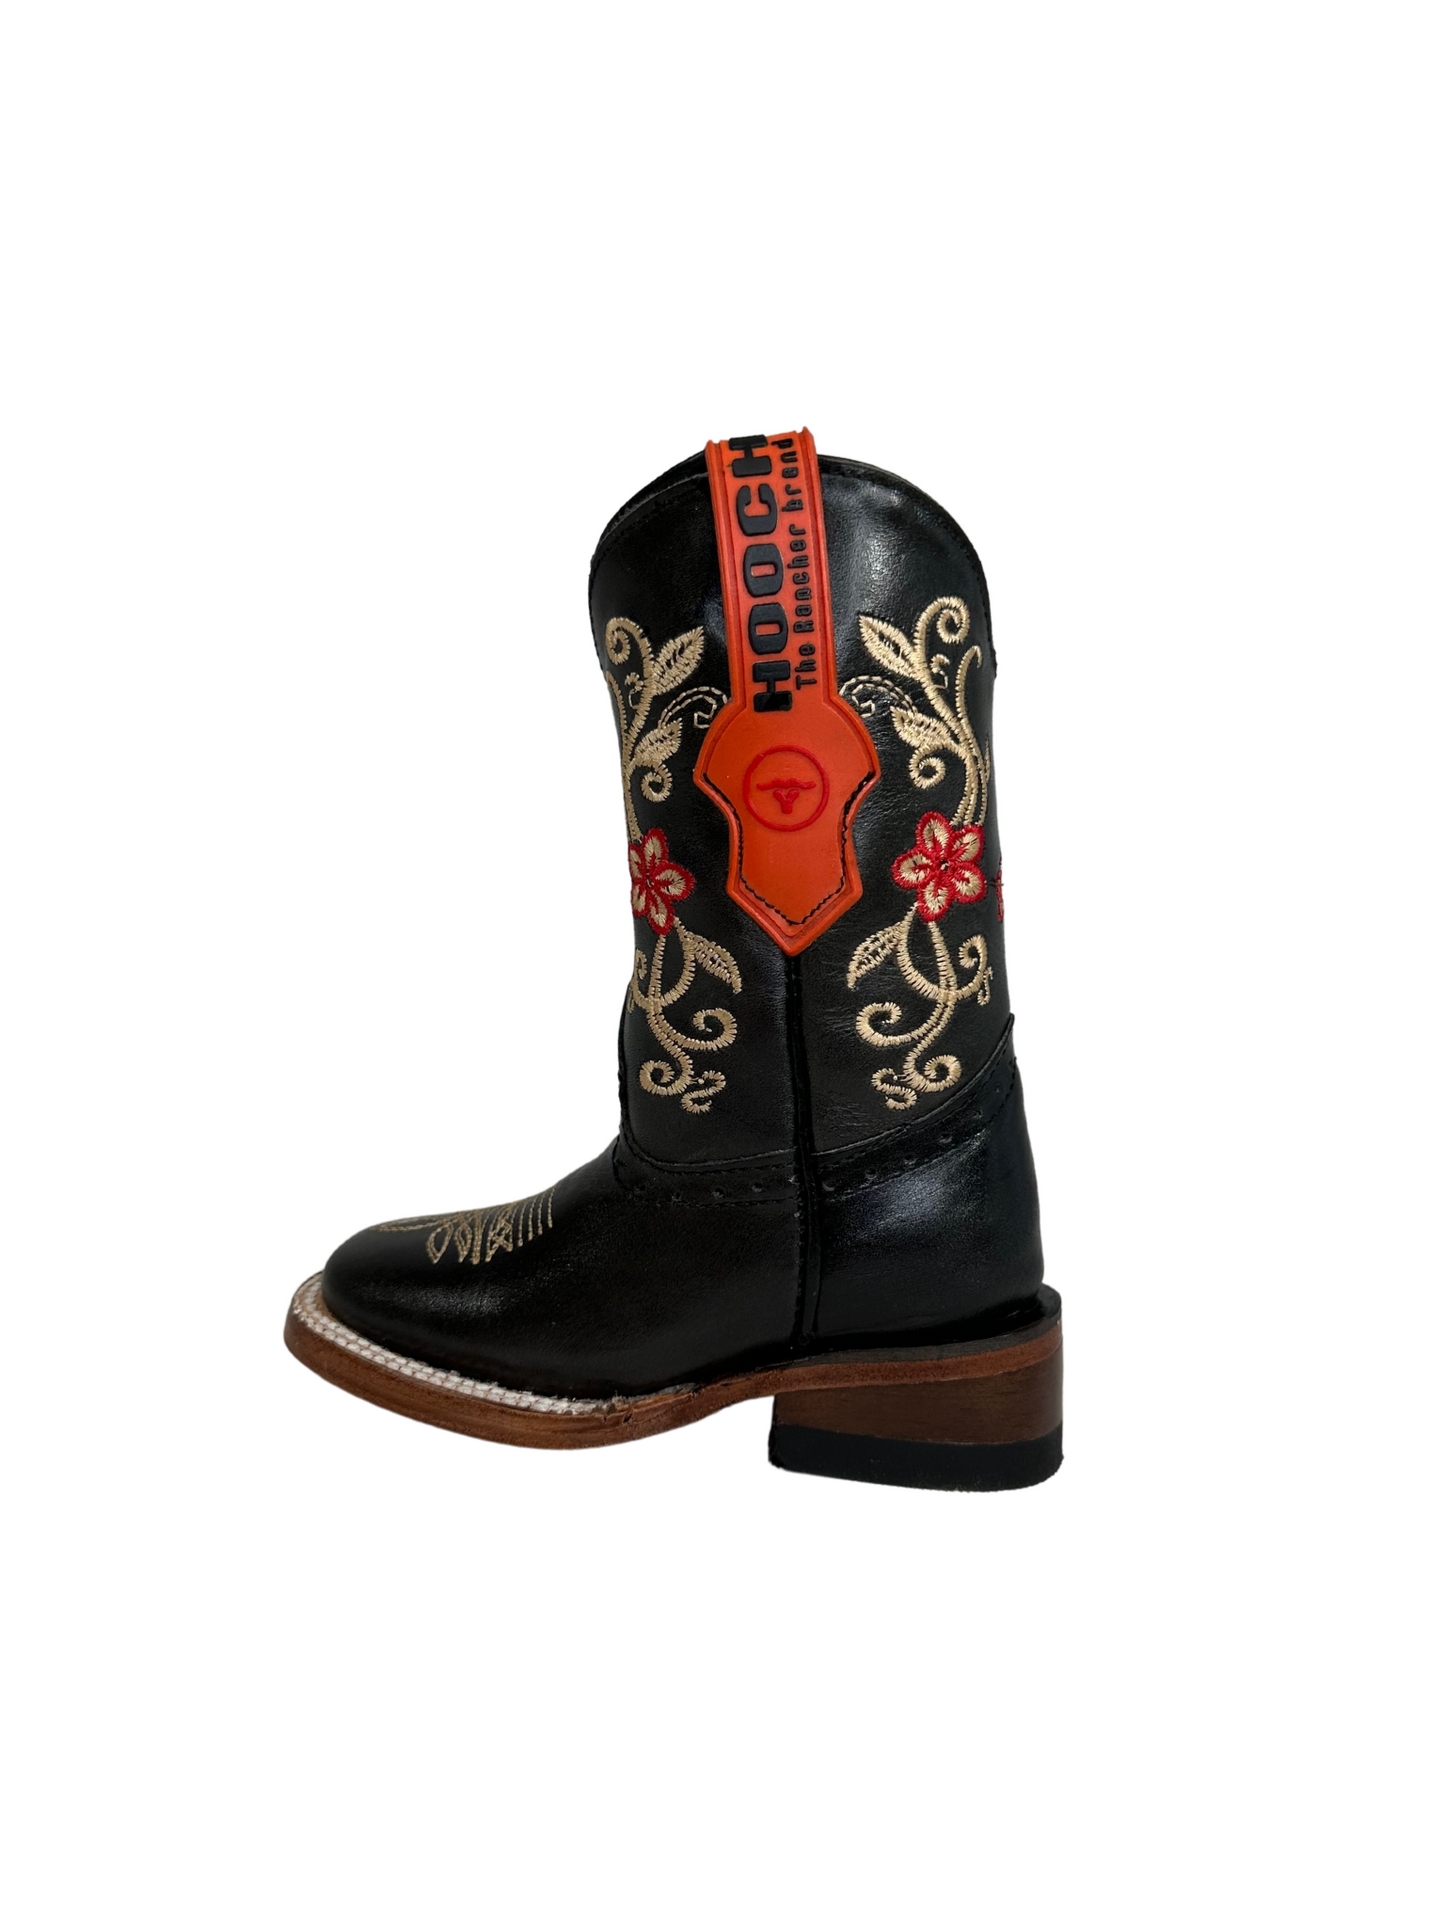 Hooch Girl's Black Leather Gold Stitched Boot